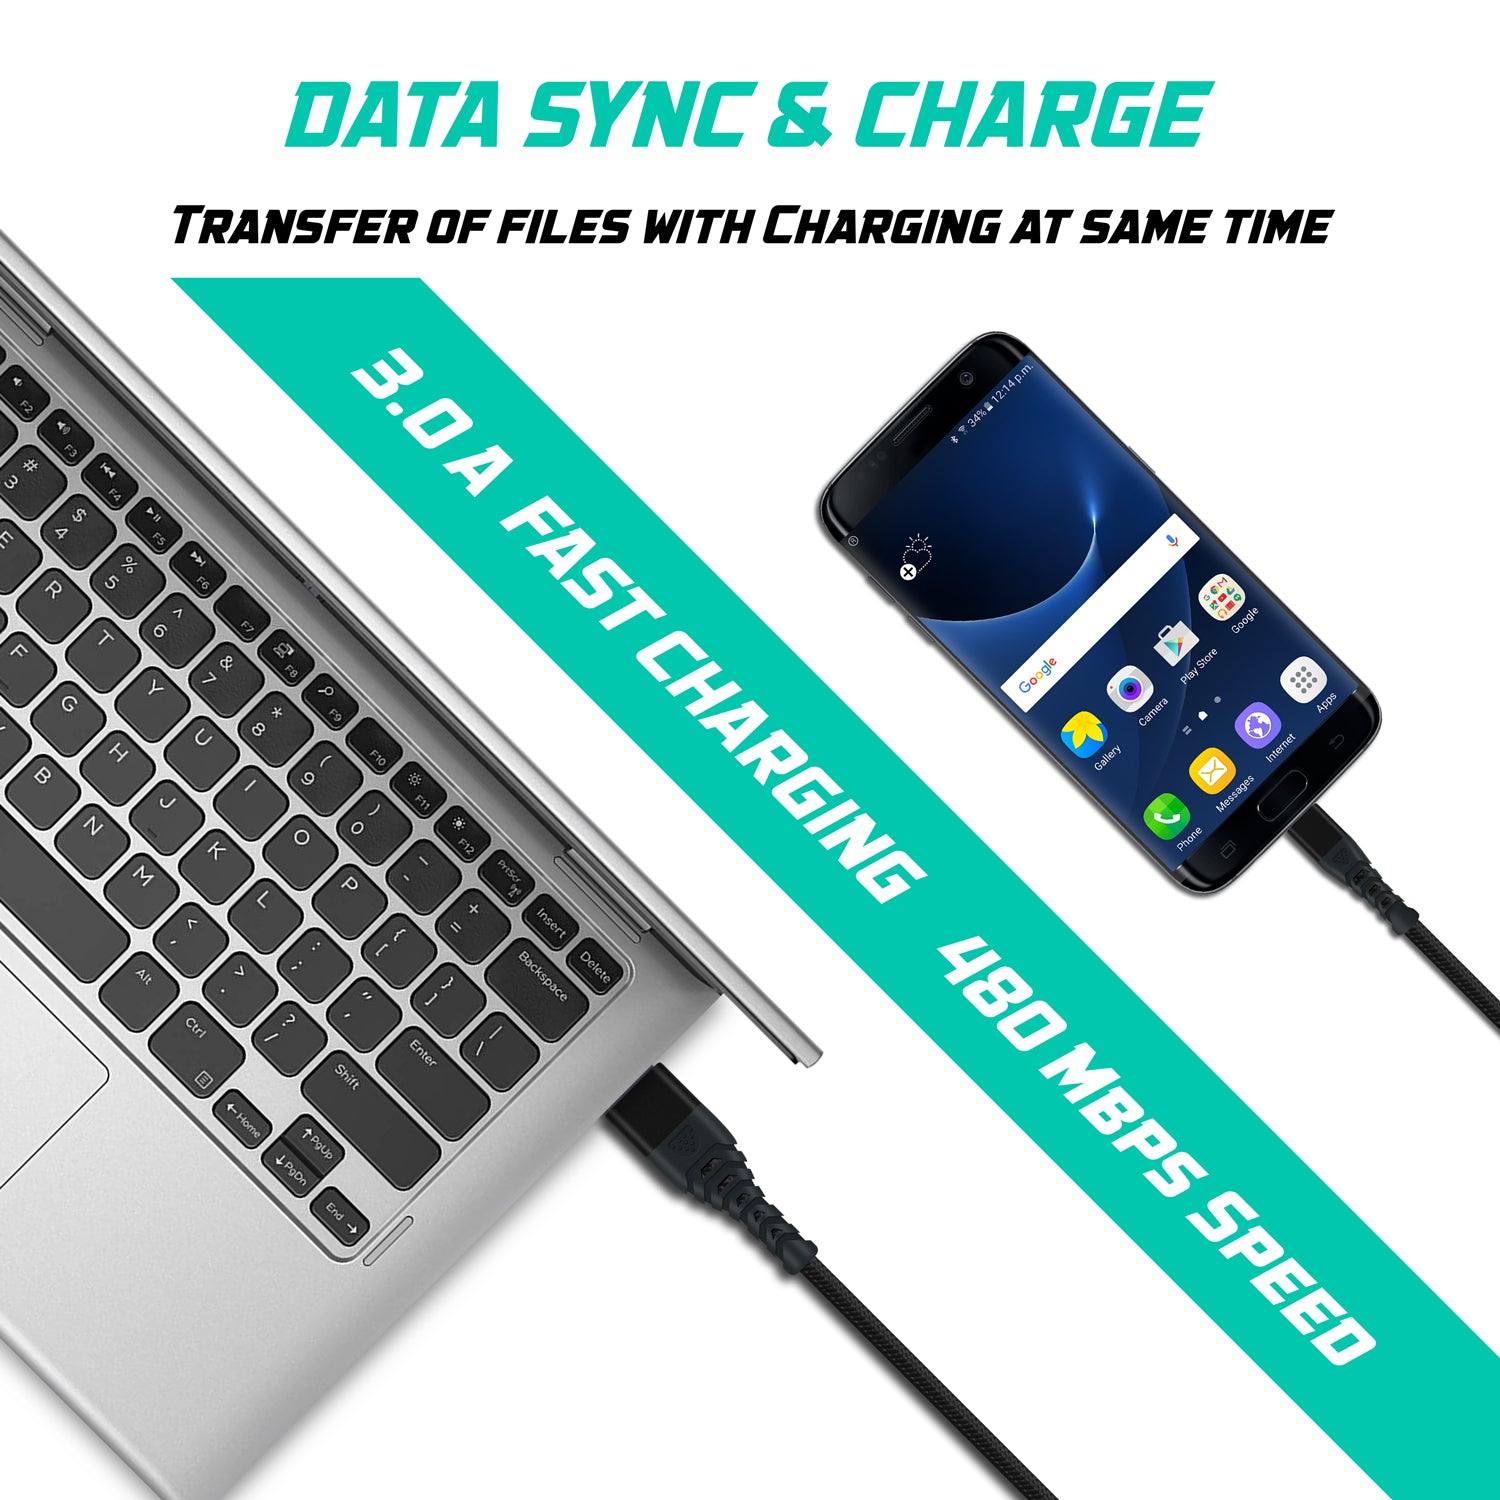 Heavy-Duty Micro USB Cable - USB 3.0 A to Micro B Fast Data and Charging Cable